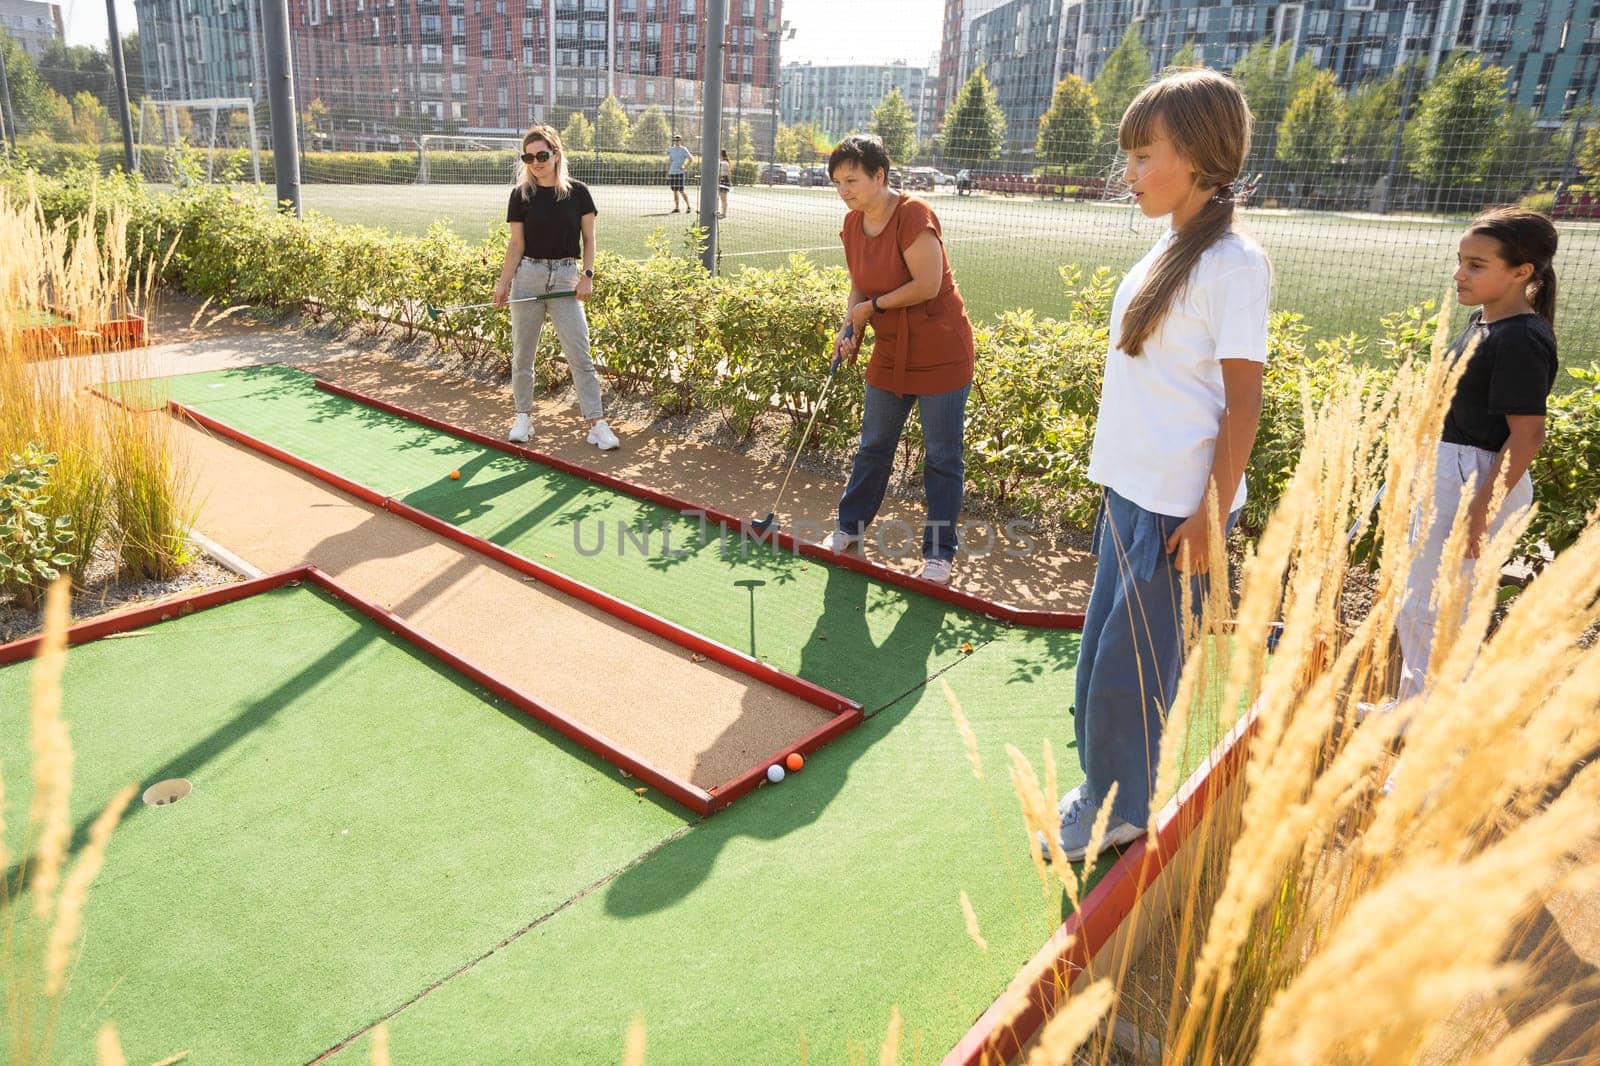 Kids playing golf inside playground artificial grass activity game for children by Andelov13